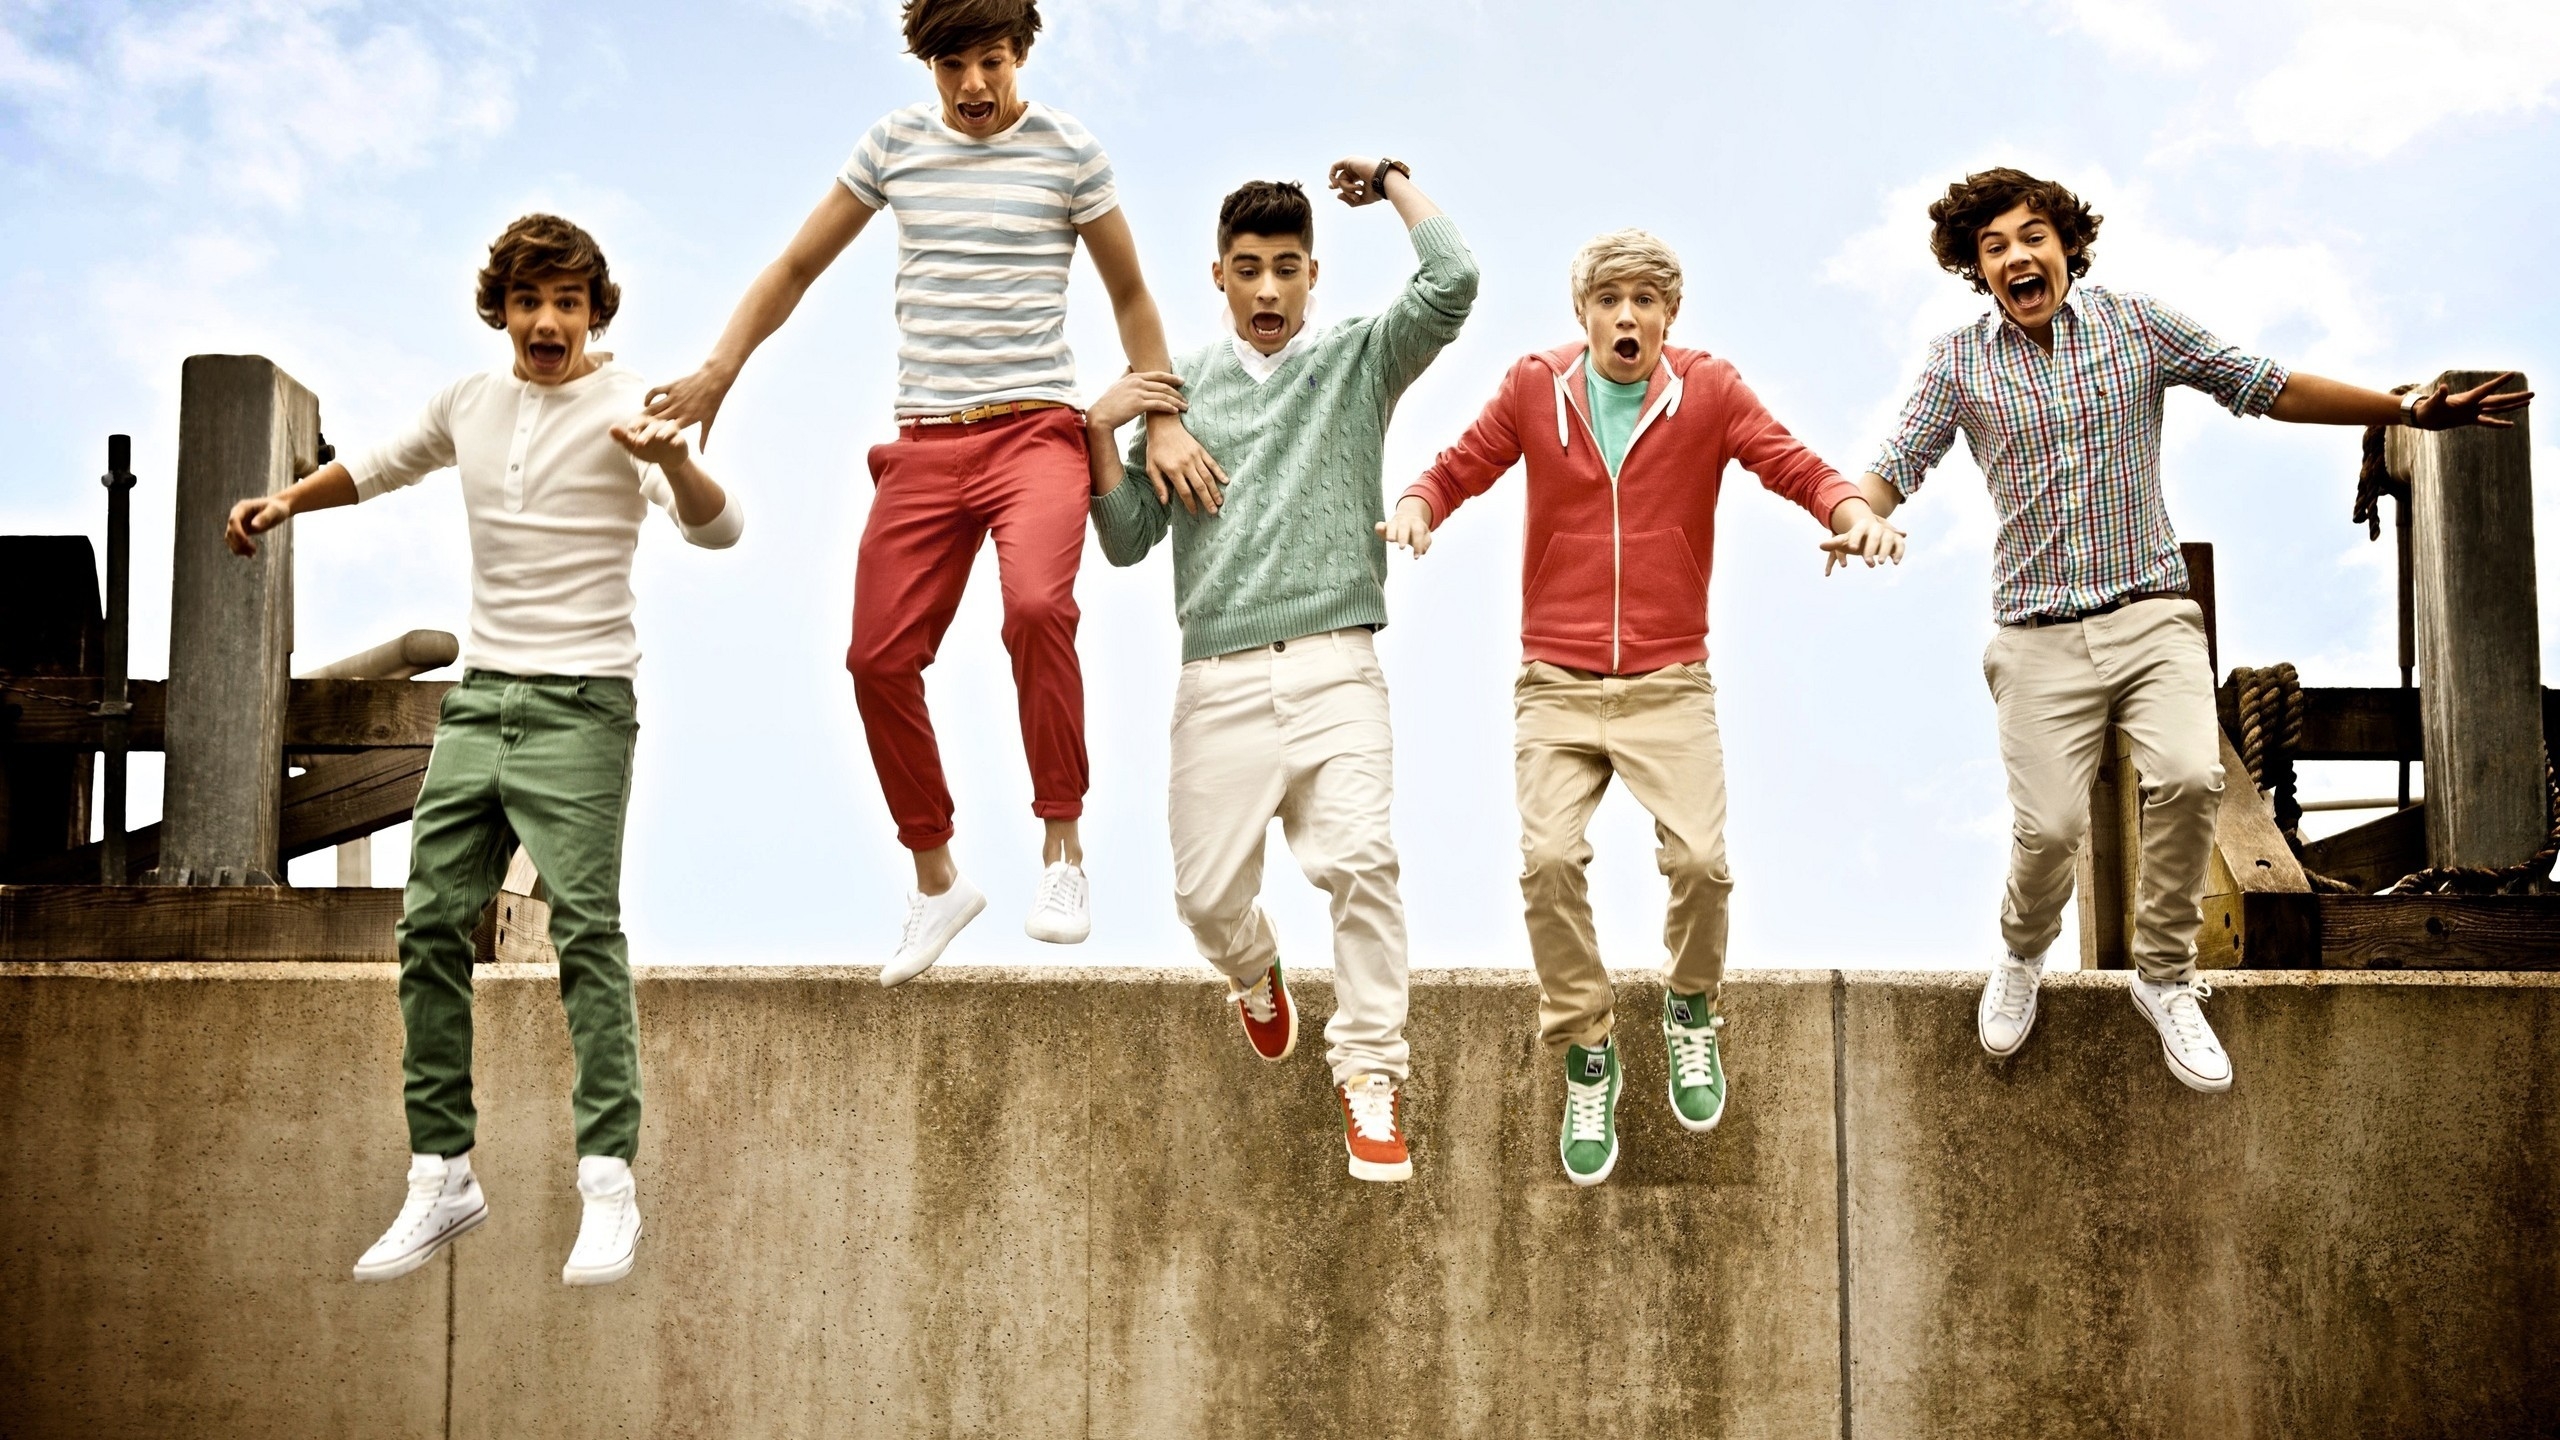 One Direction Jumping for 2560x1440 HDTV resolution